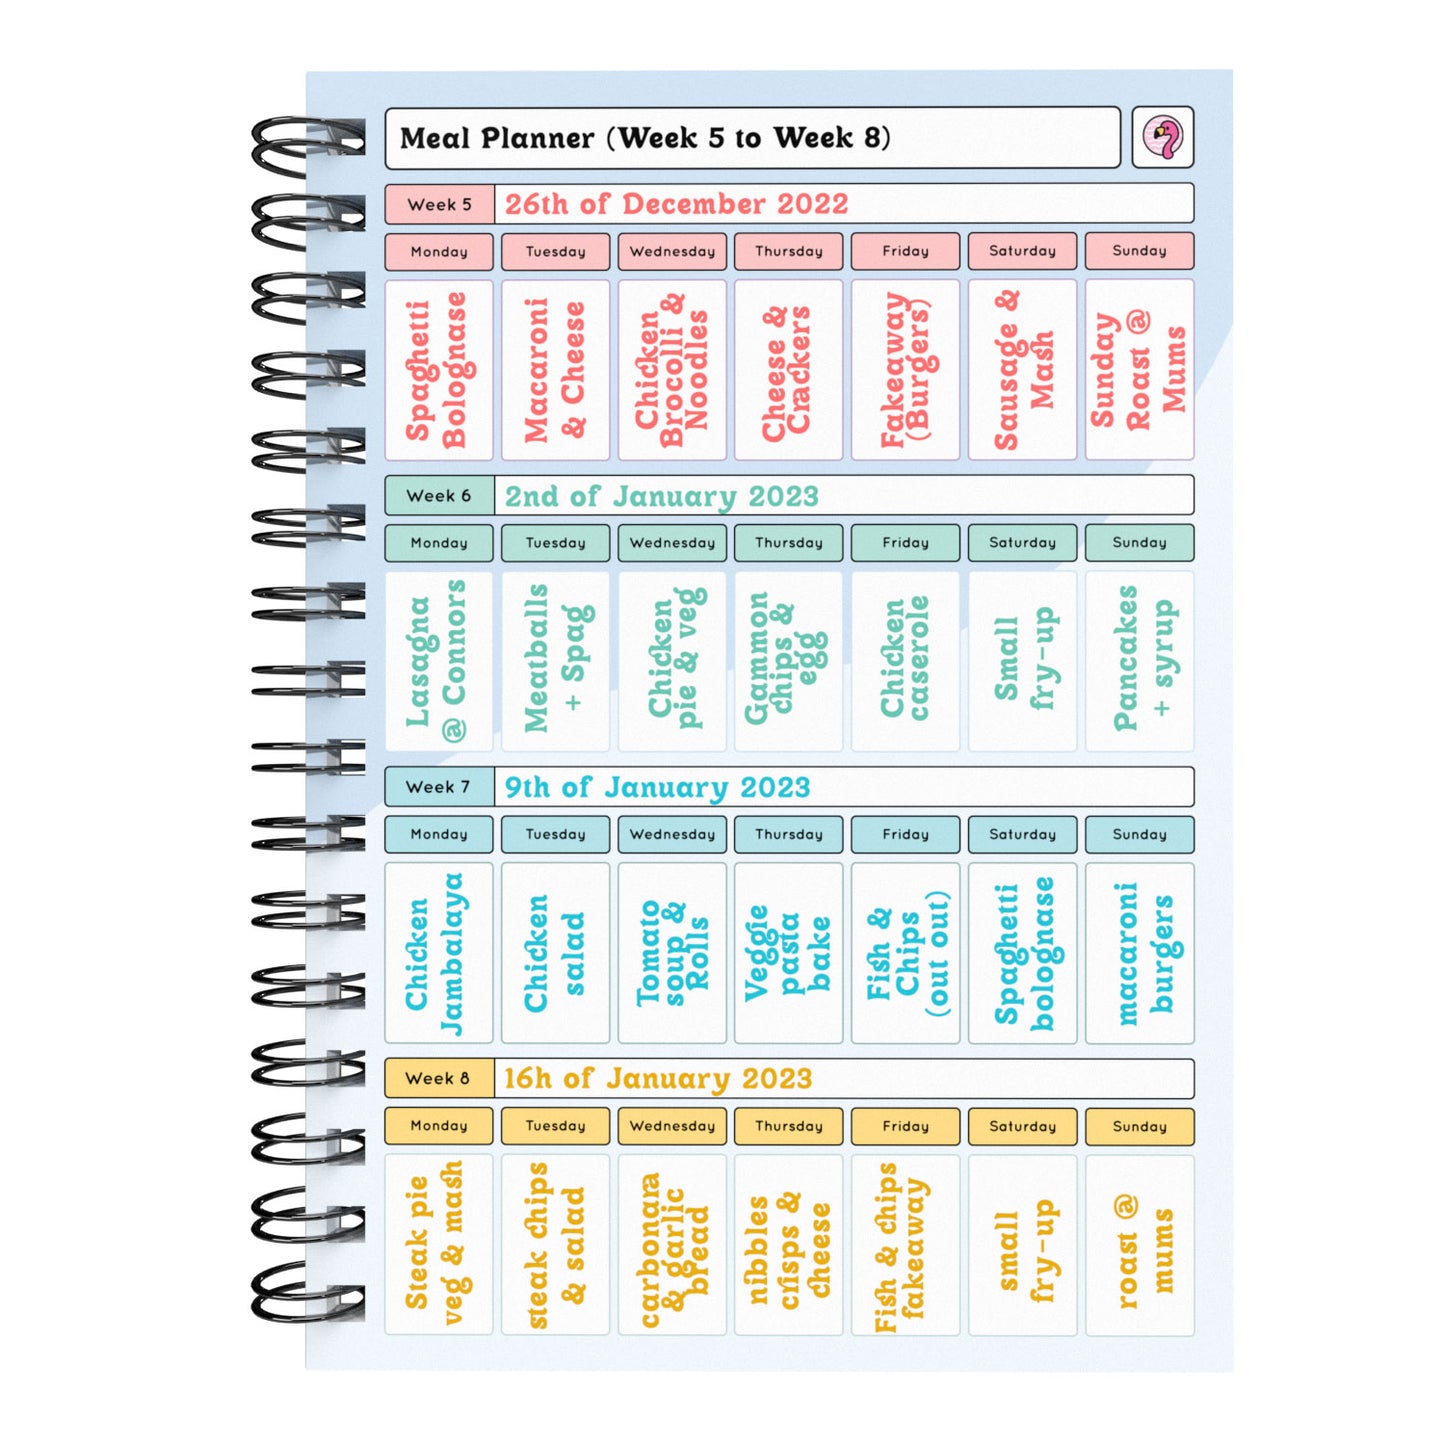 Food Diary - C49 - Calorie Counting